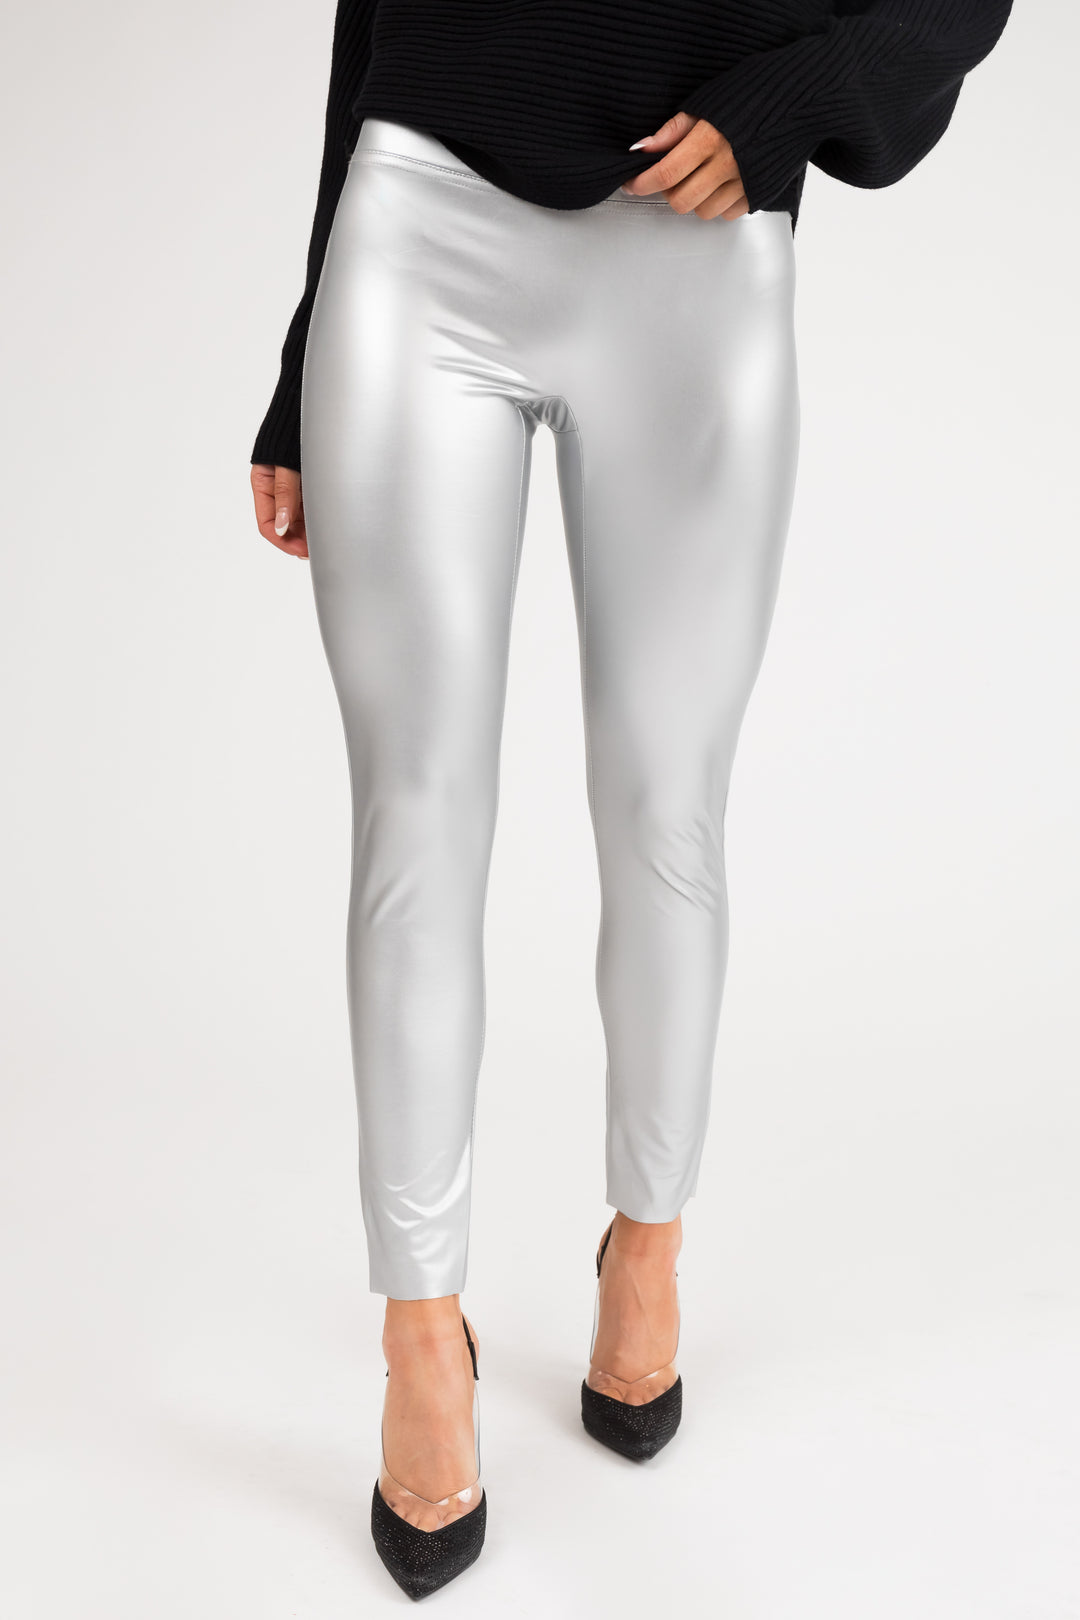 Silver High Waisted Faux Leather Leggings & Lime Lush